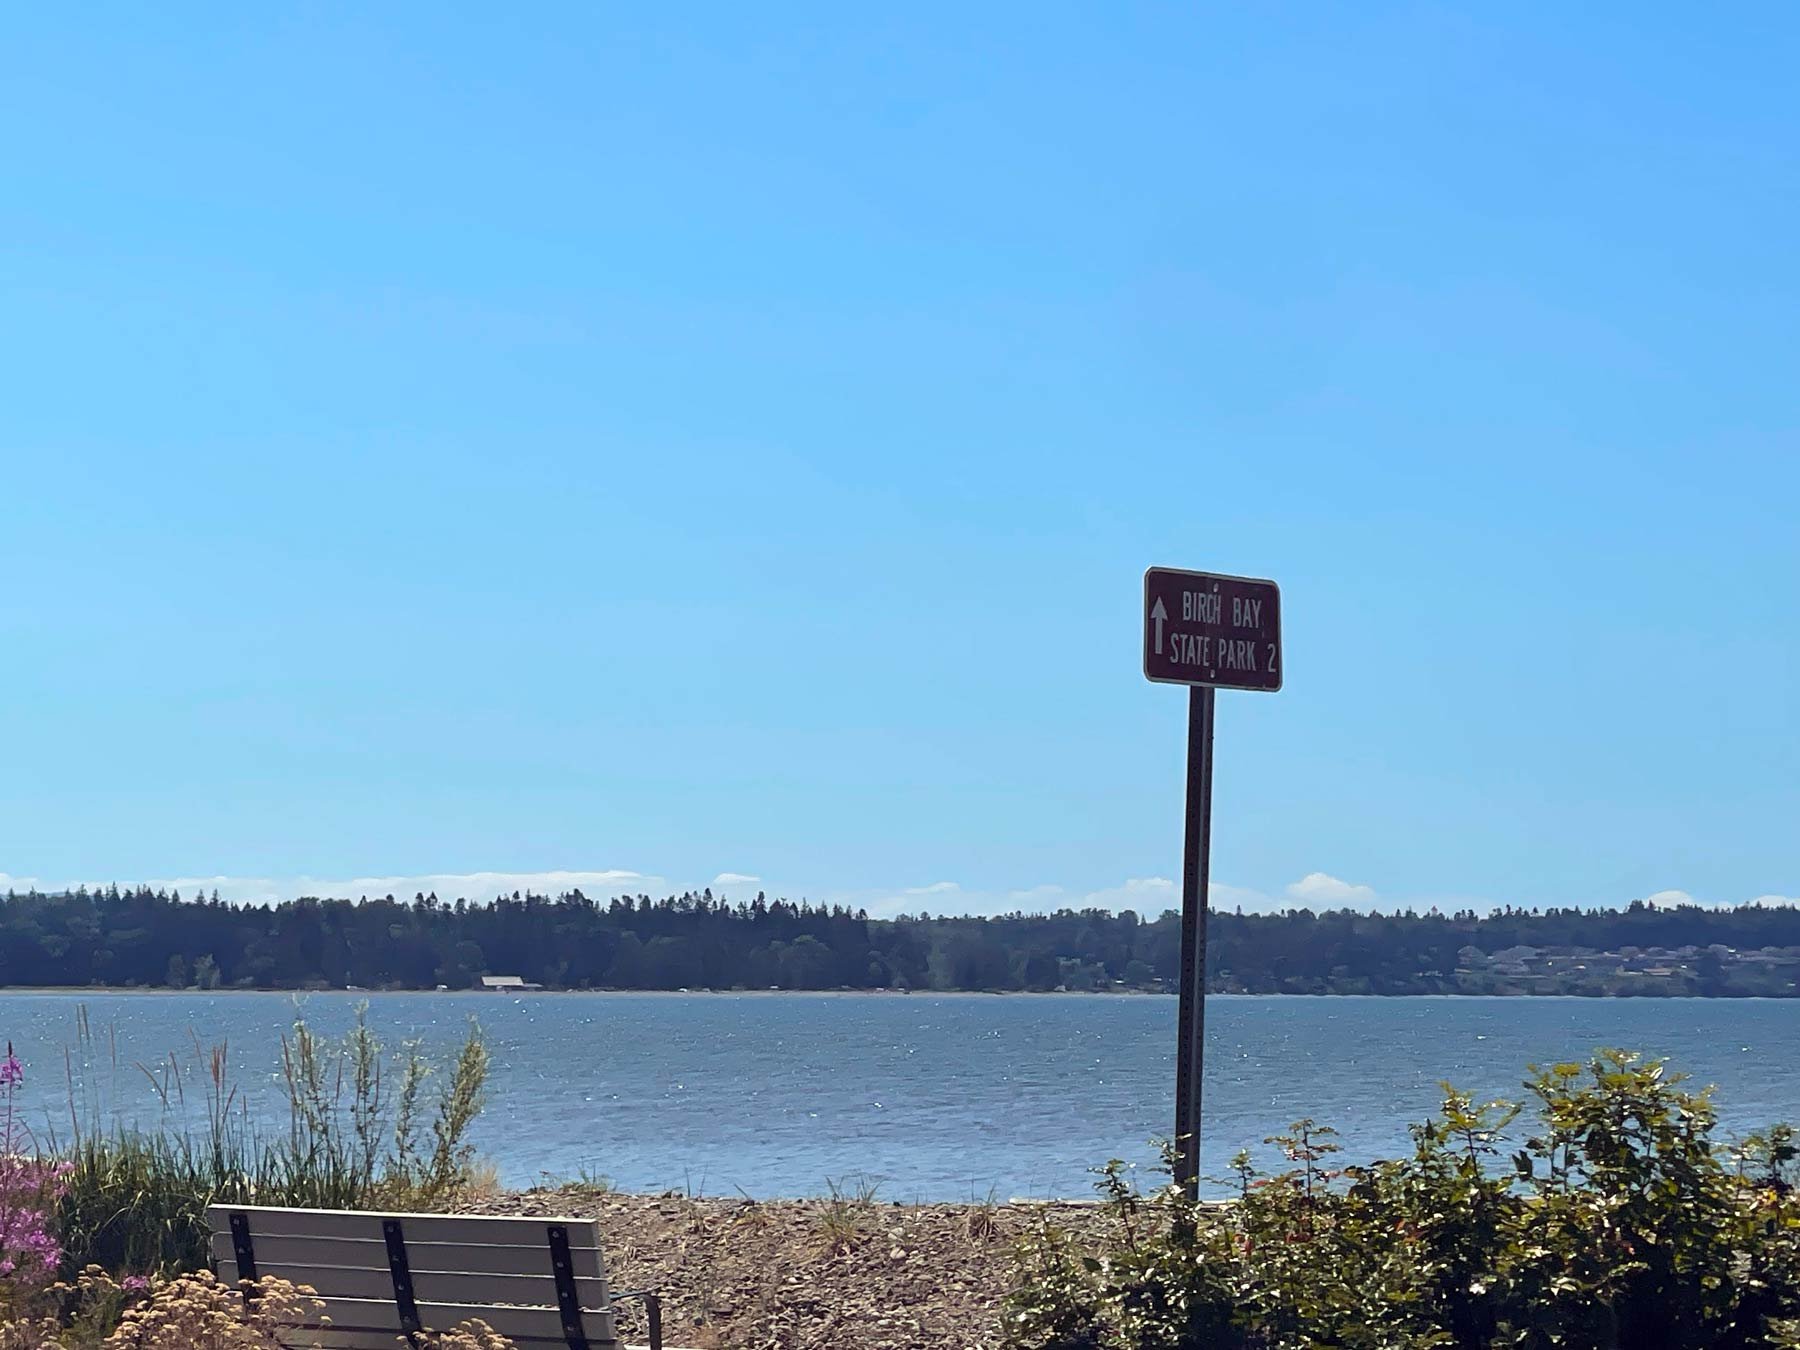 Birch-Bay-State-park-sign-with-bench-and-view-of-Birch-bay.